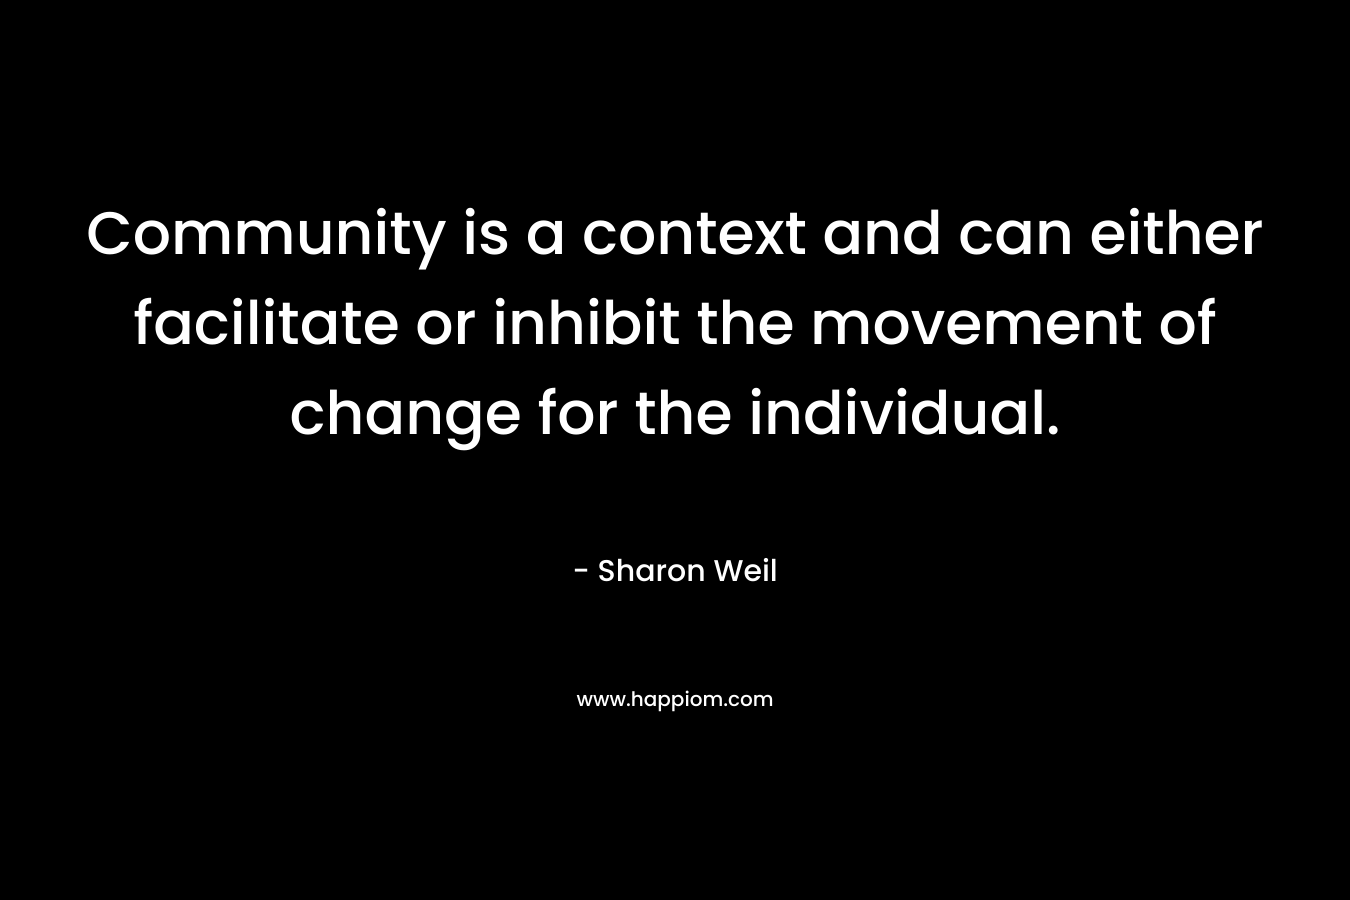 Community is a context and can either facilitate or inhibit the movement of change for the individual. – Sharon Weil